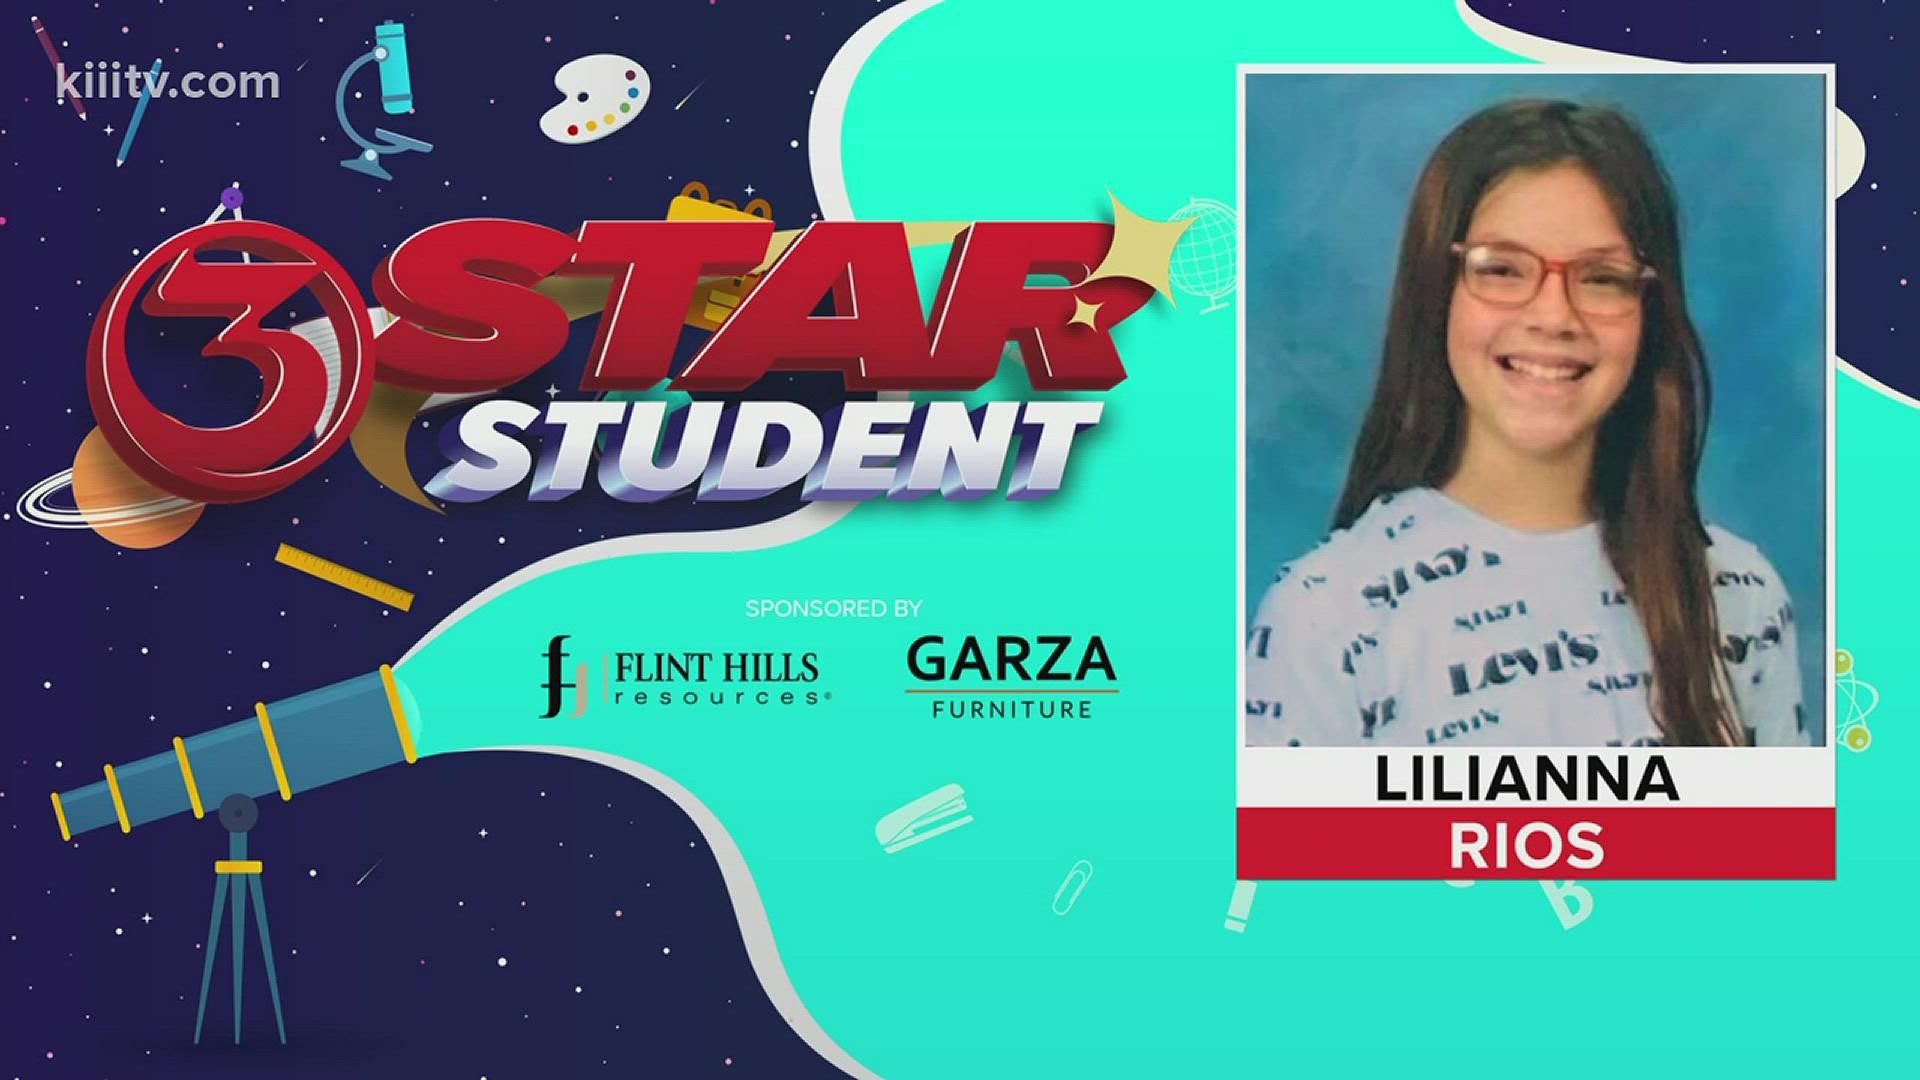 Lilianna is a straight A student, and her favorite subject is math!